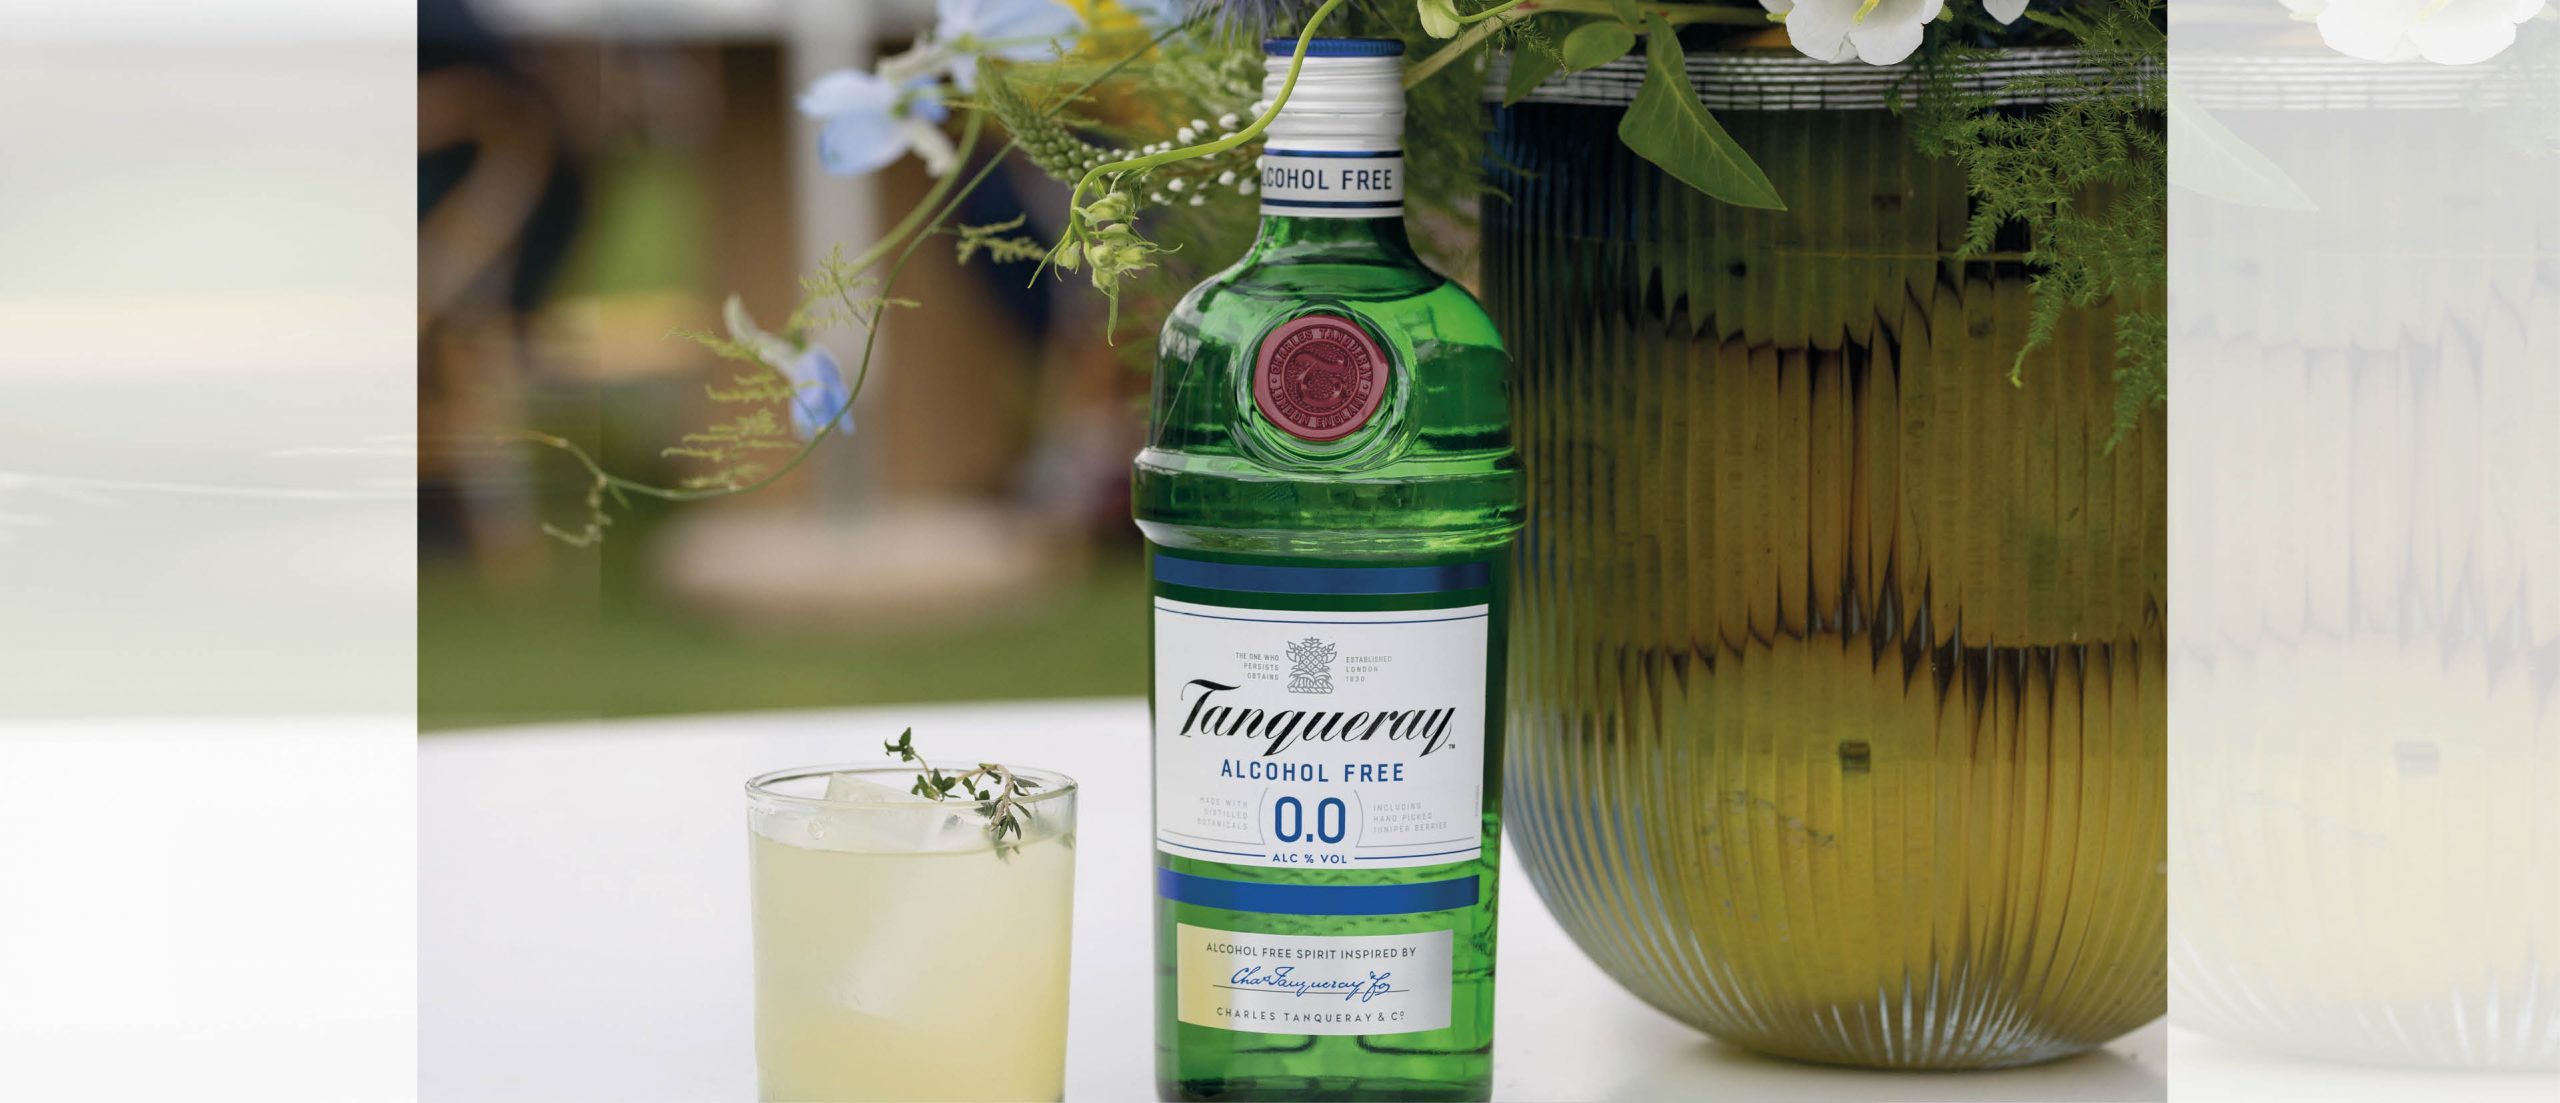 Worry-free, alcohol-free Tanqueray Get - Magazine It